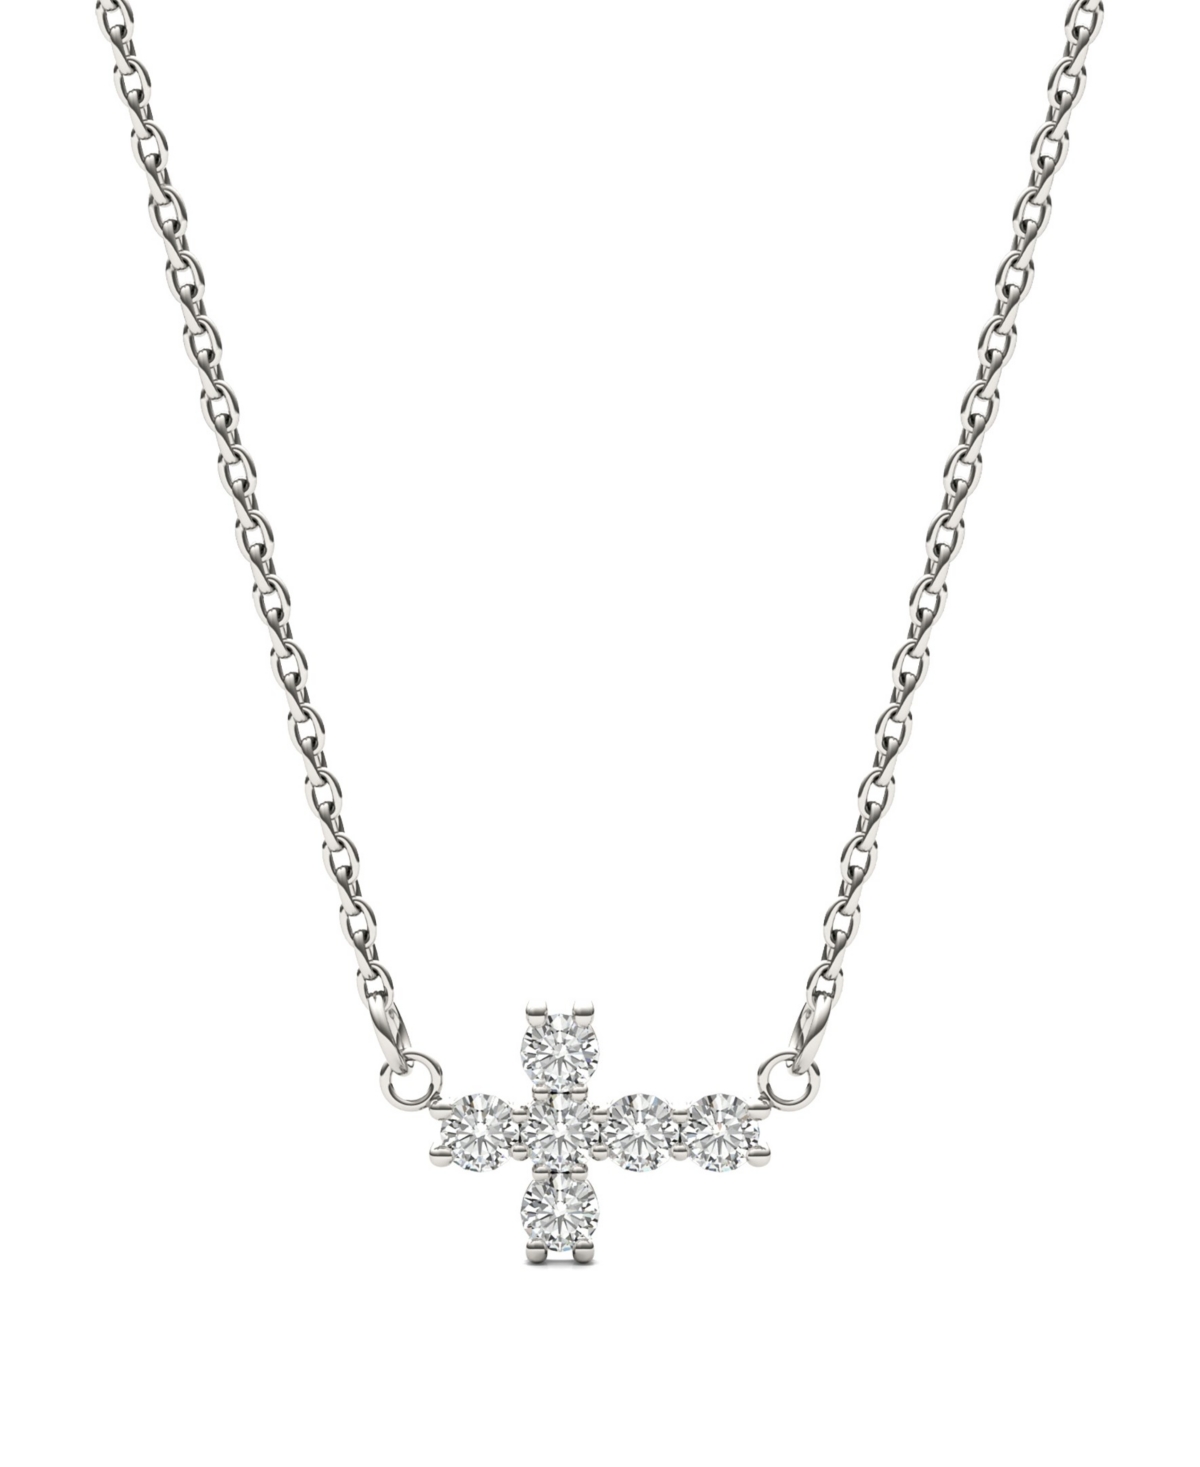 Moissanite Fixed Cross Necklace (1/5 Carat Total Weight Certified Diamond Equivalent) in 14K White Gold - White Gold